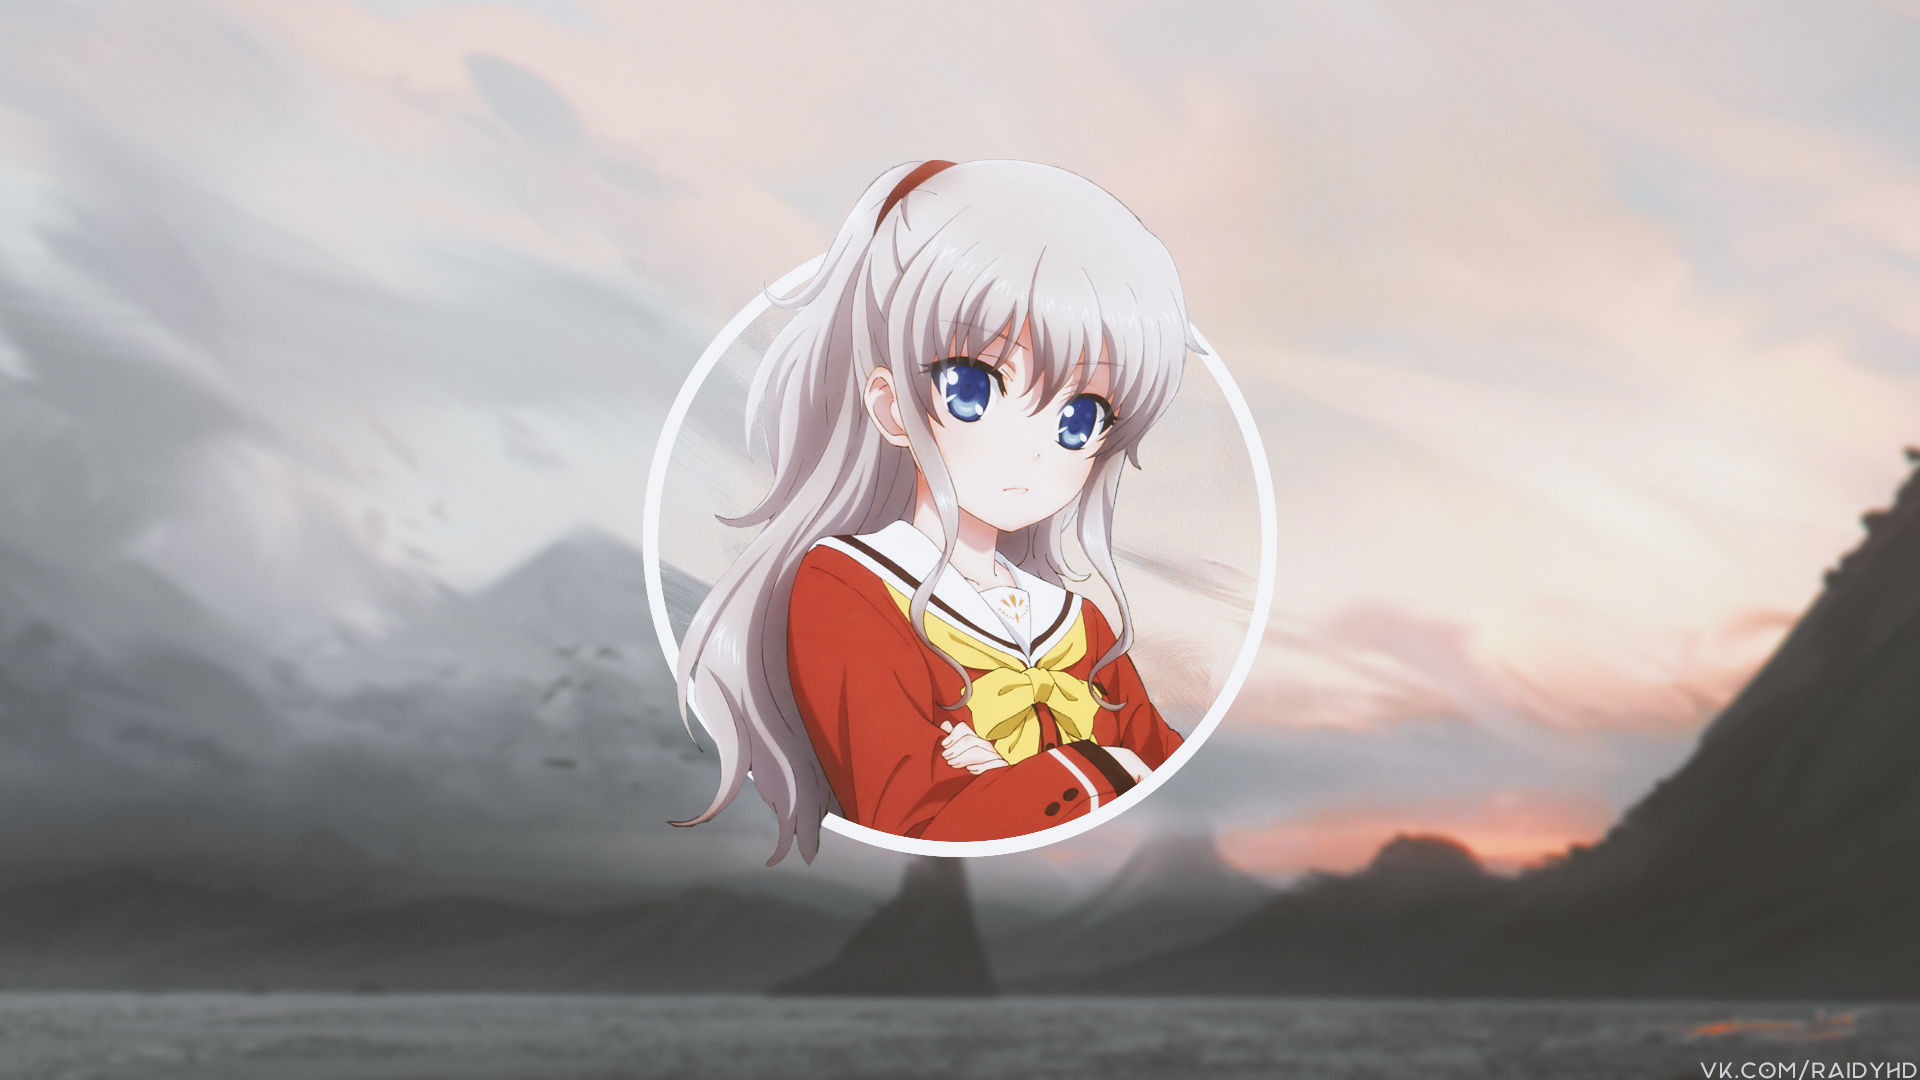 Anime 1920x1080 anime anime girls picture-in-picture watermarked Charlotte (anime)